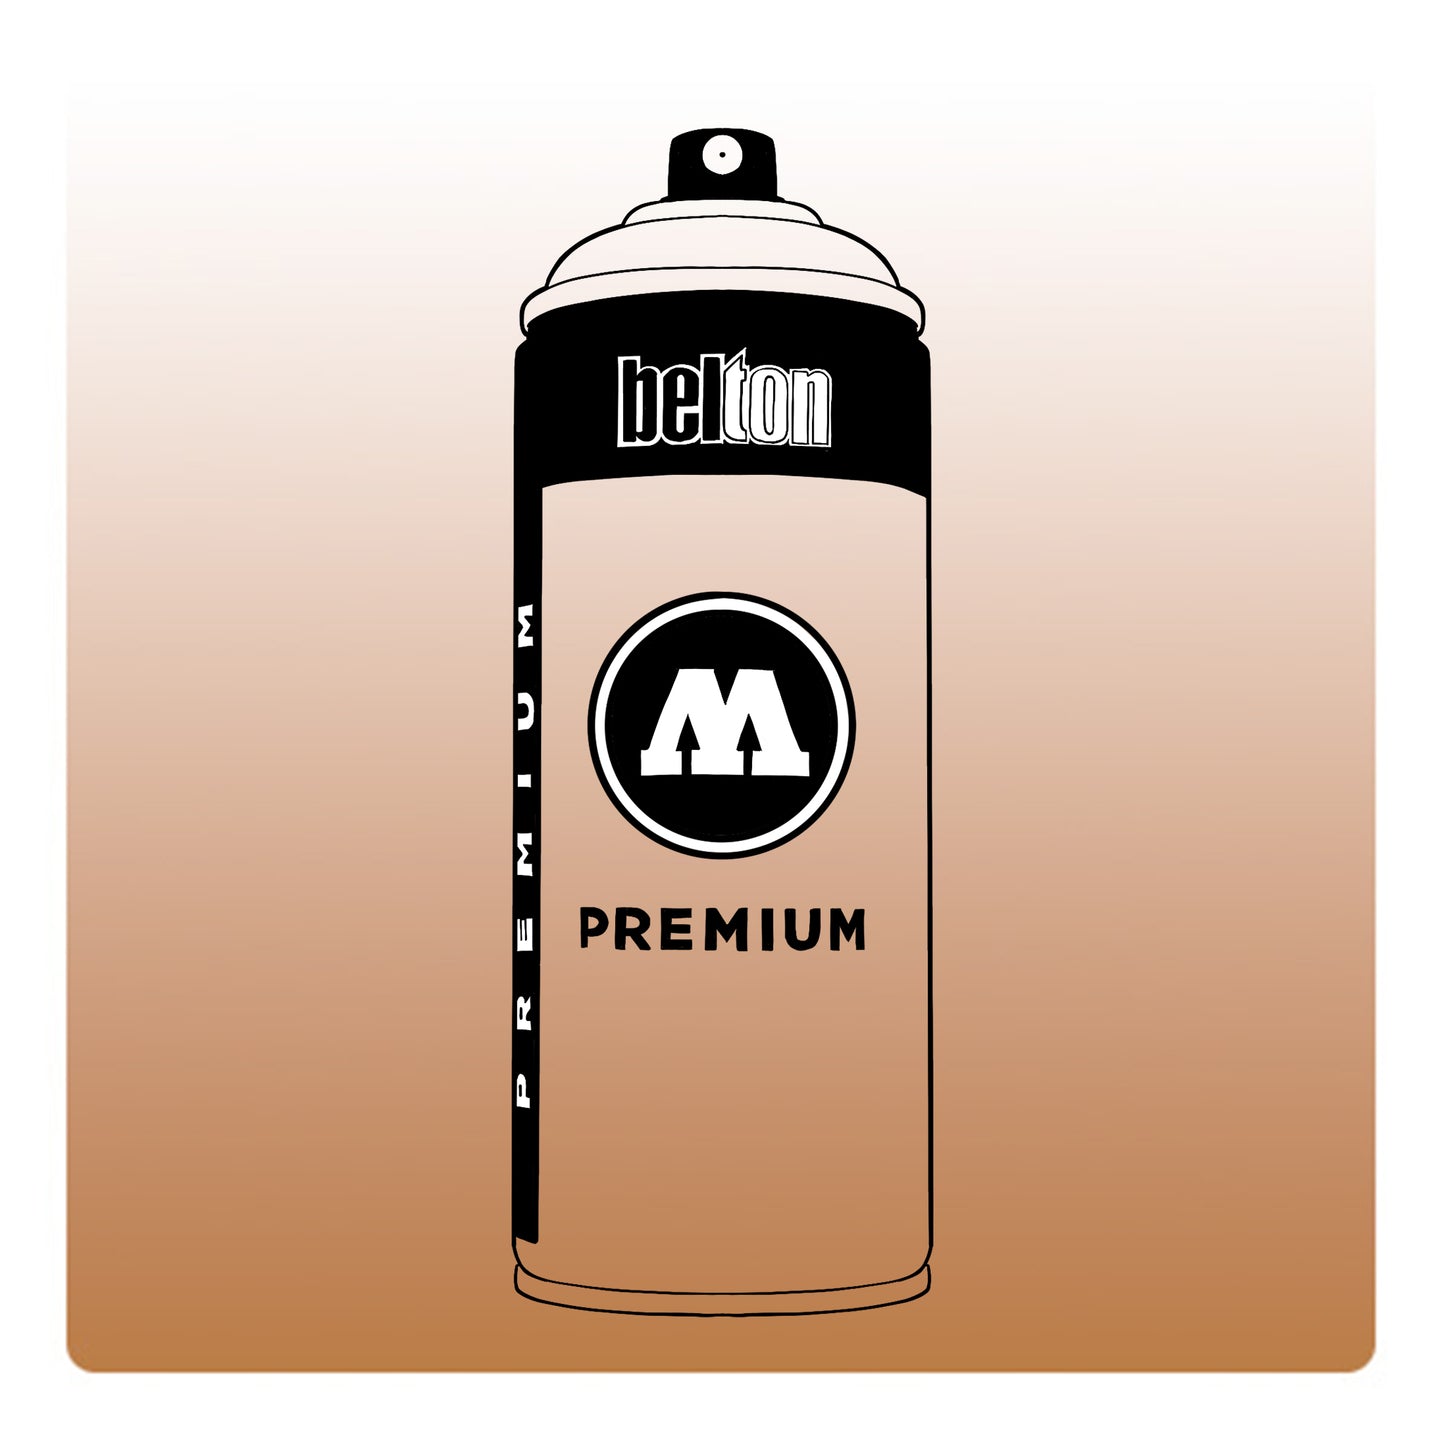 A line drawing of a spray paint can with a transparent, brown color swatch.